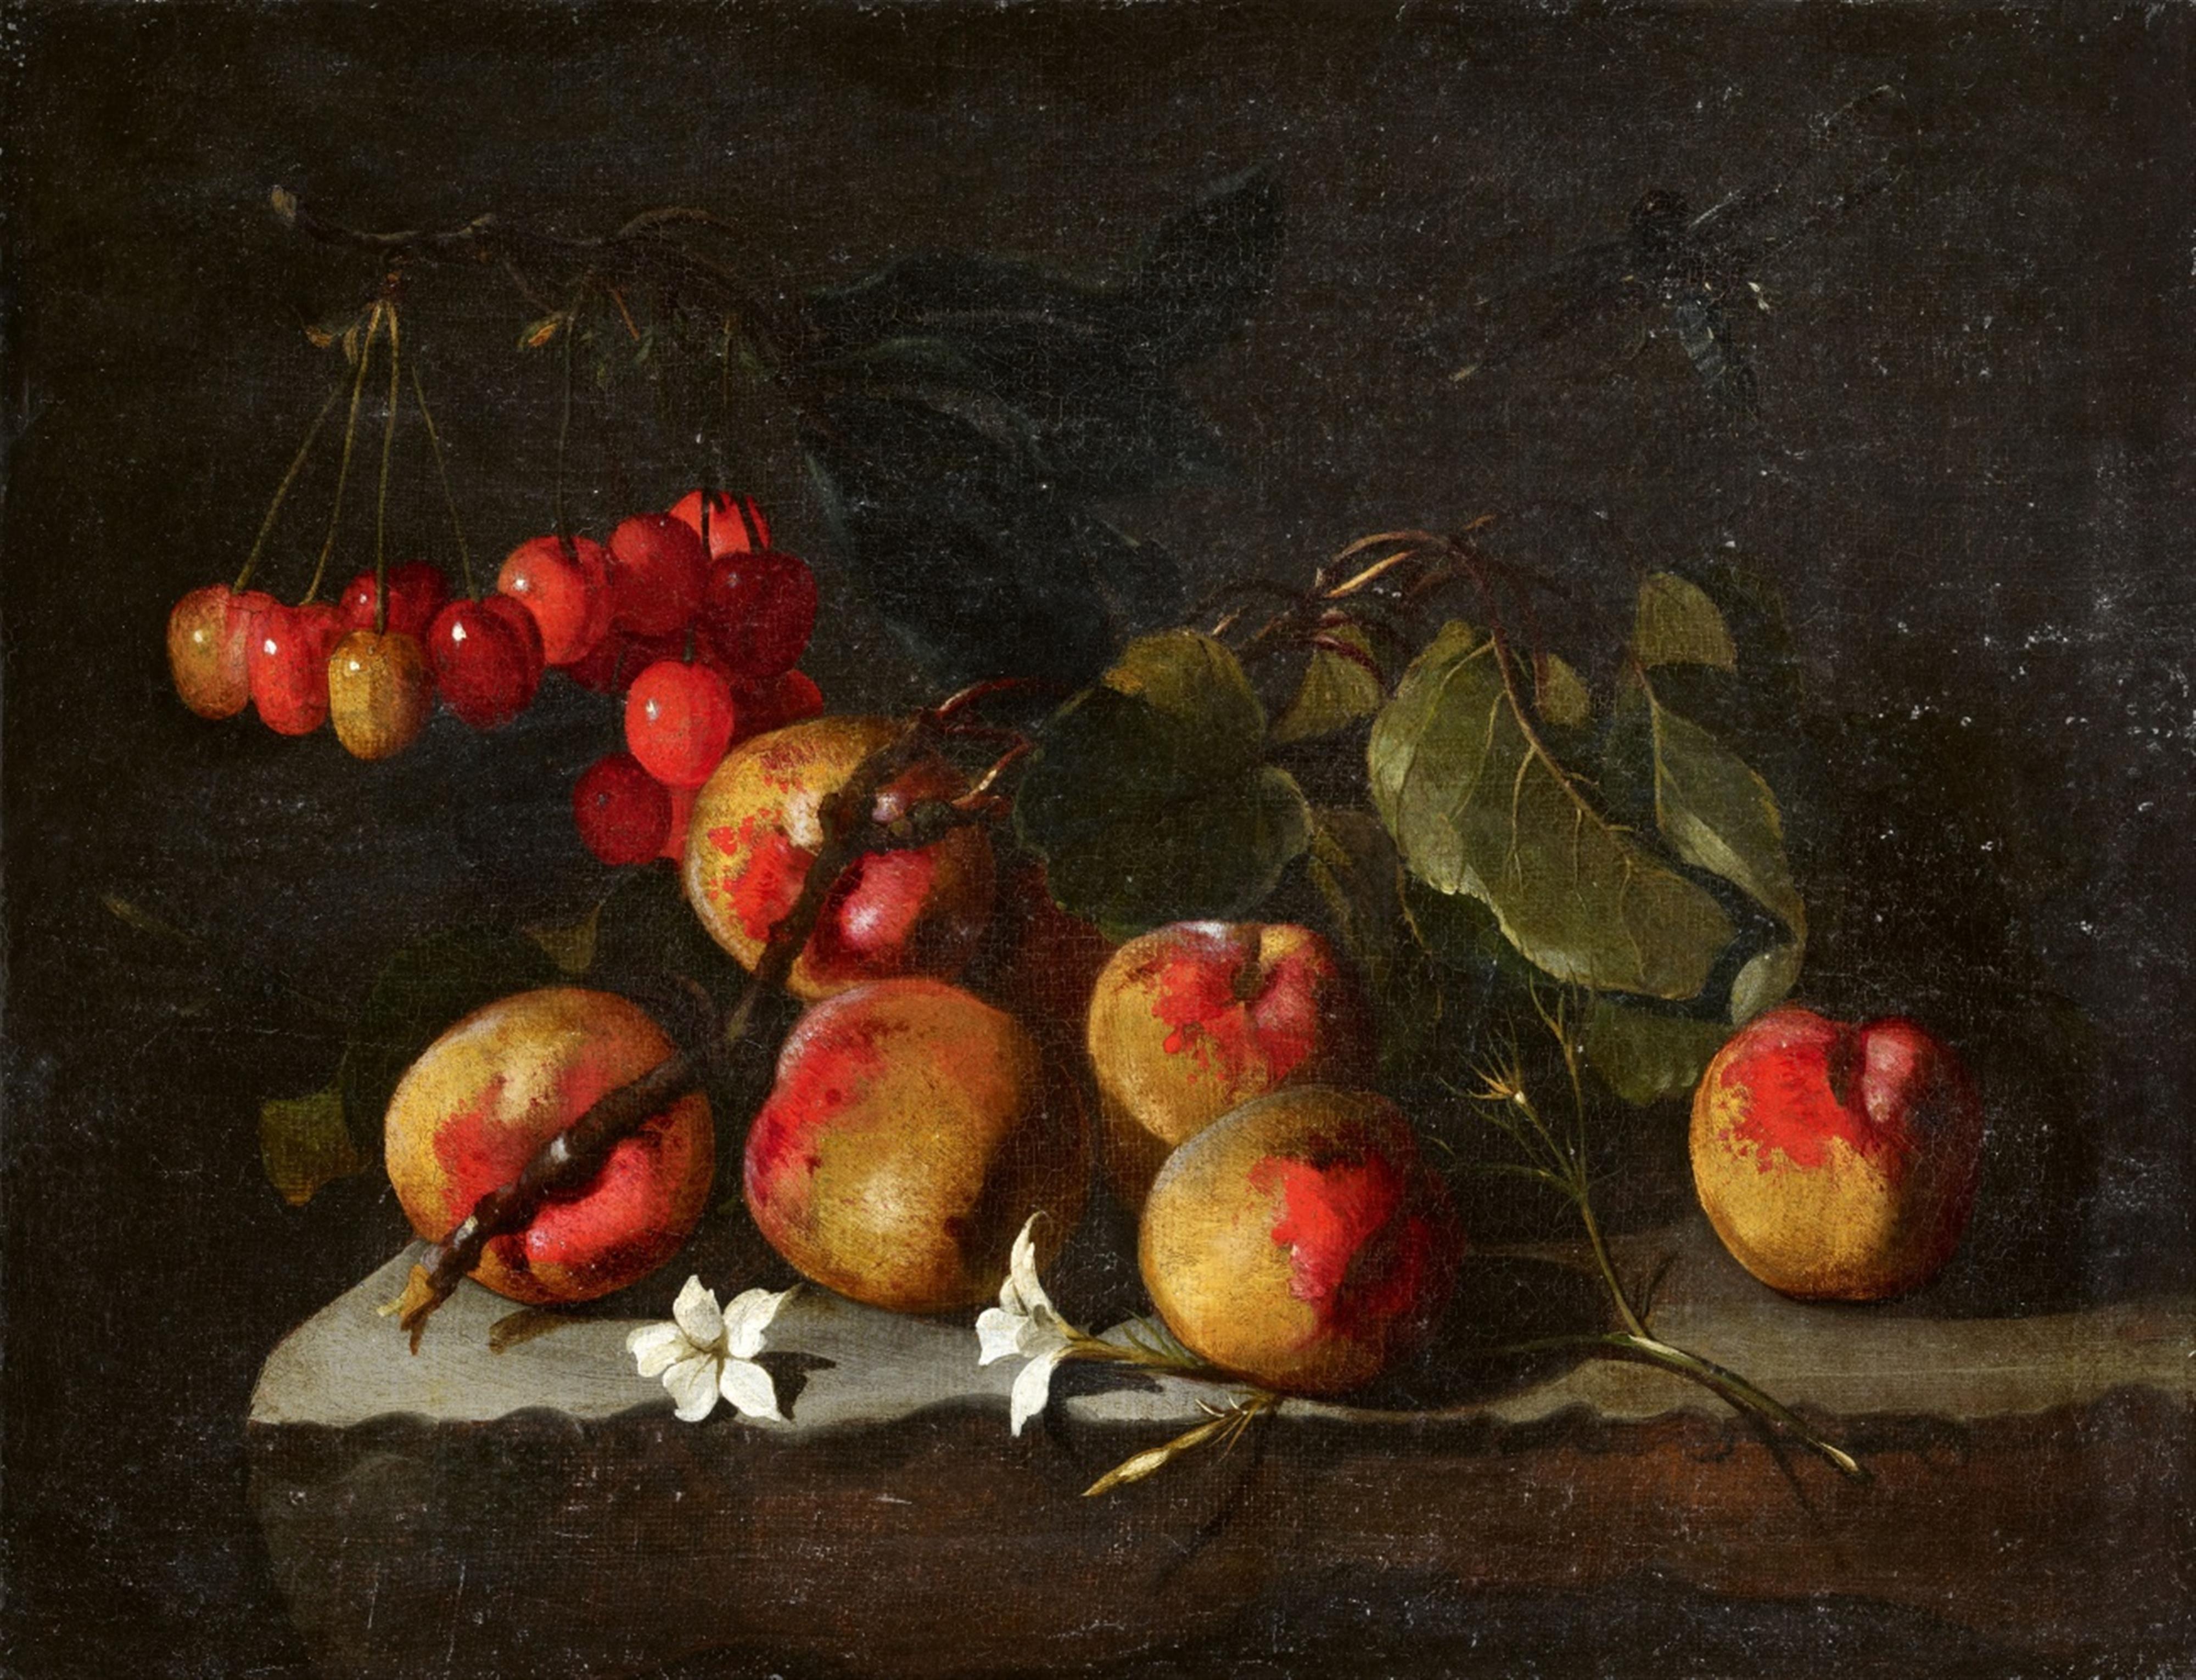 Paolo Porpora - Still Life with Peaches, Cherries, and Jasmine Flowers